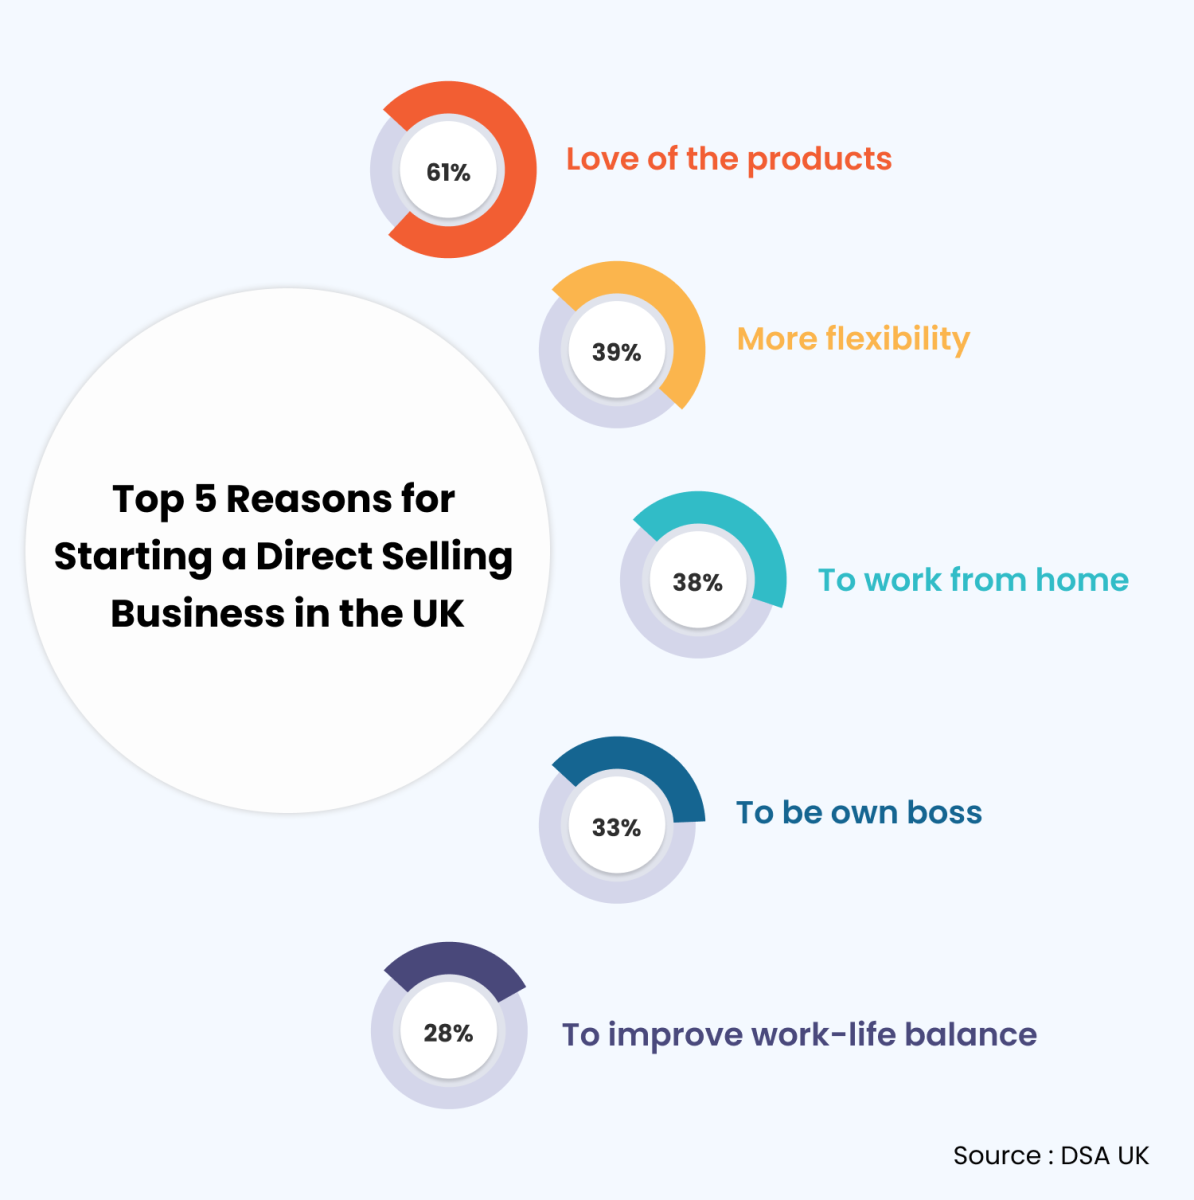 Reasons for starting a direct selling business